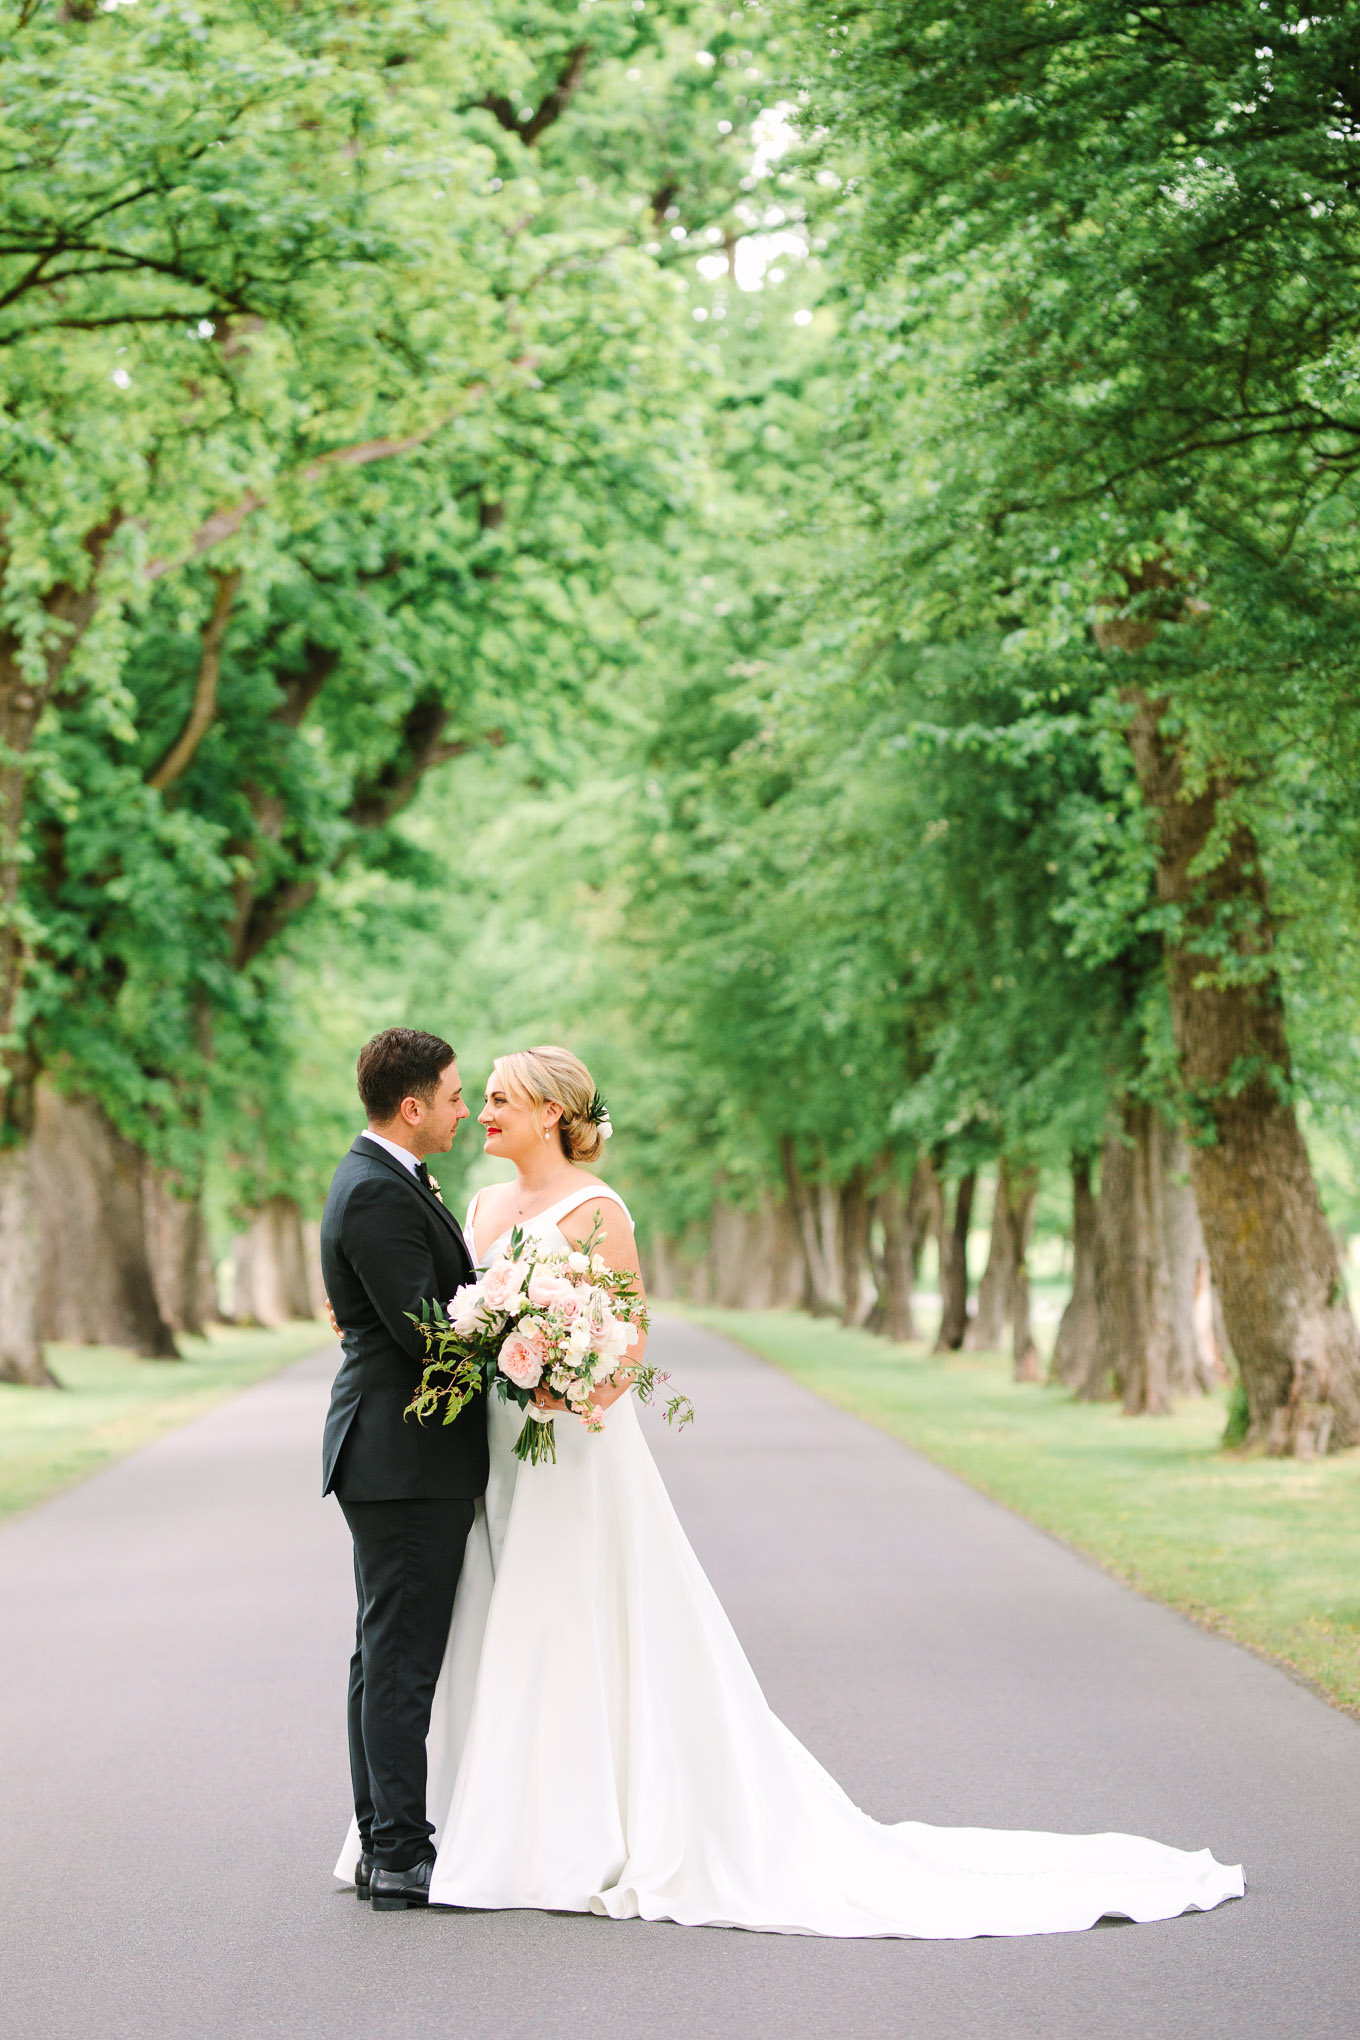 Bride and groom portrait in tree-lined road. Millbrook Resort Queenstown New Zealand wedding by Mary Costa Photography | www.marycostaweddings.com